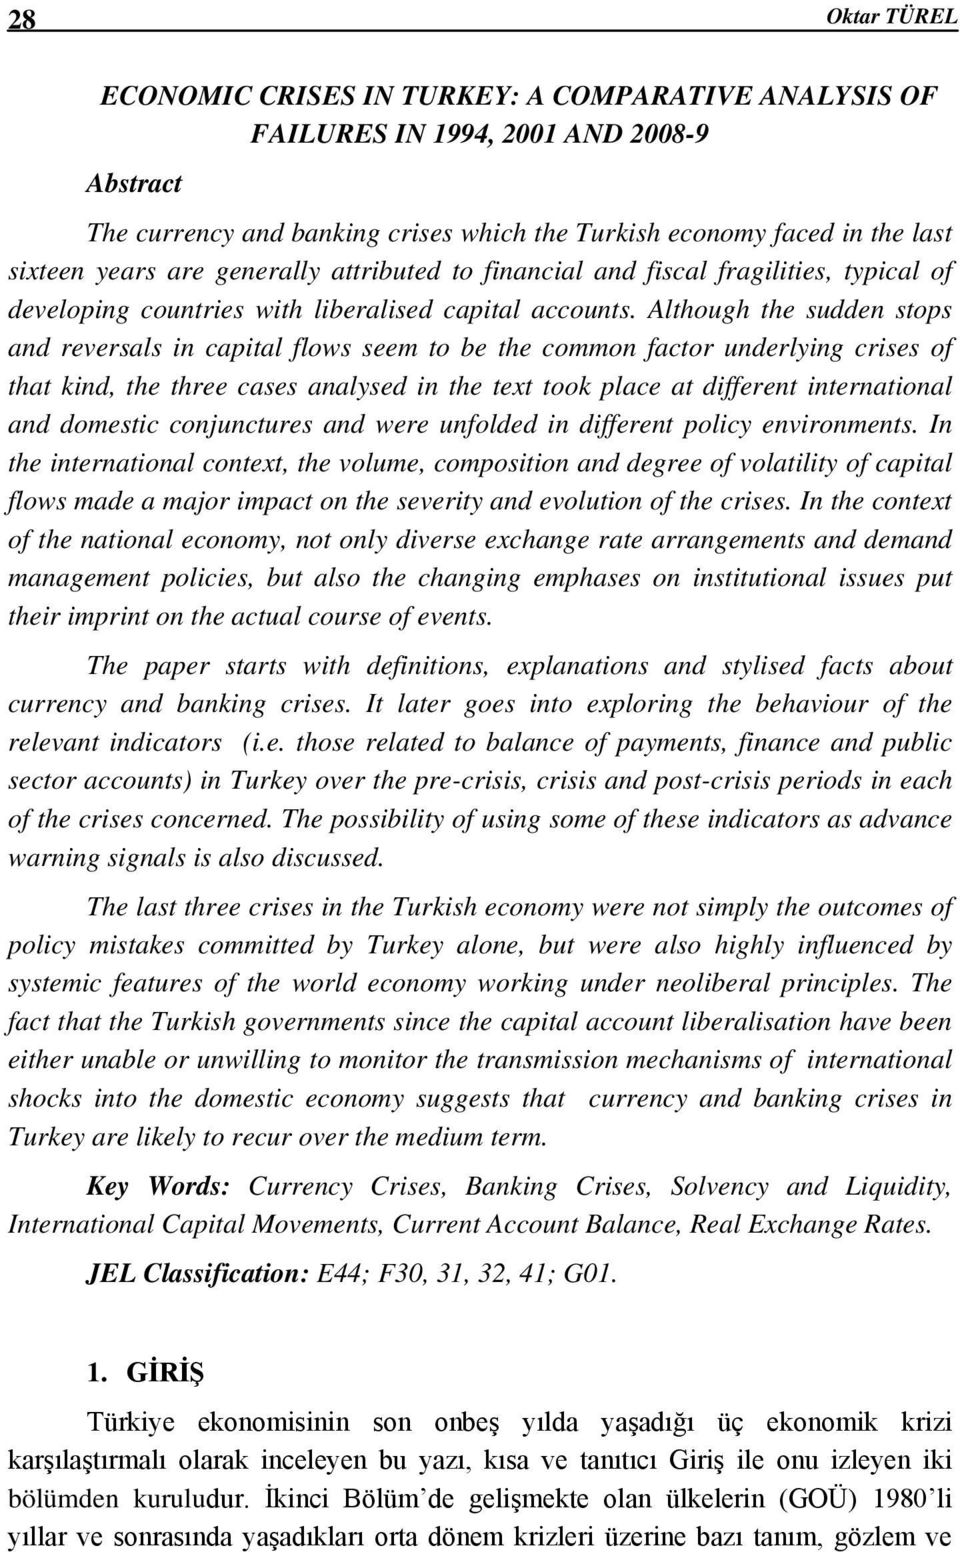 Although the sudden stops and reversals in capital flows seem to be the common factor underlying crises of that kind, the three cases analysed in the text took place at different international and